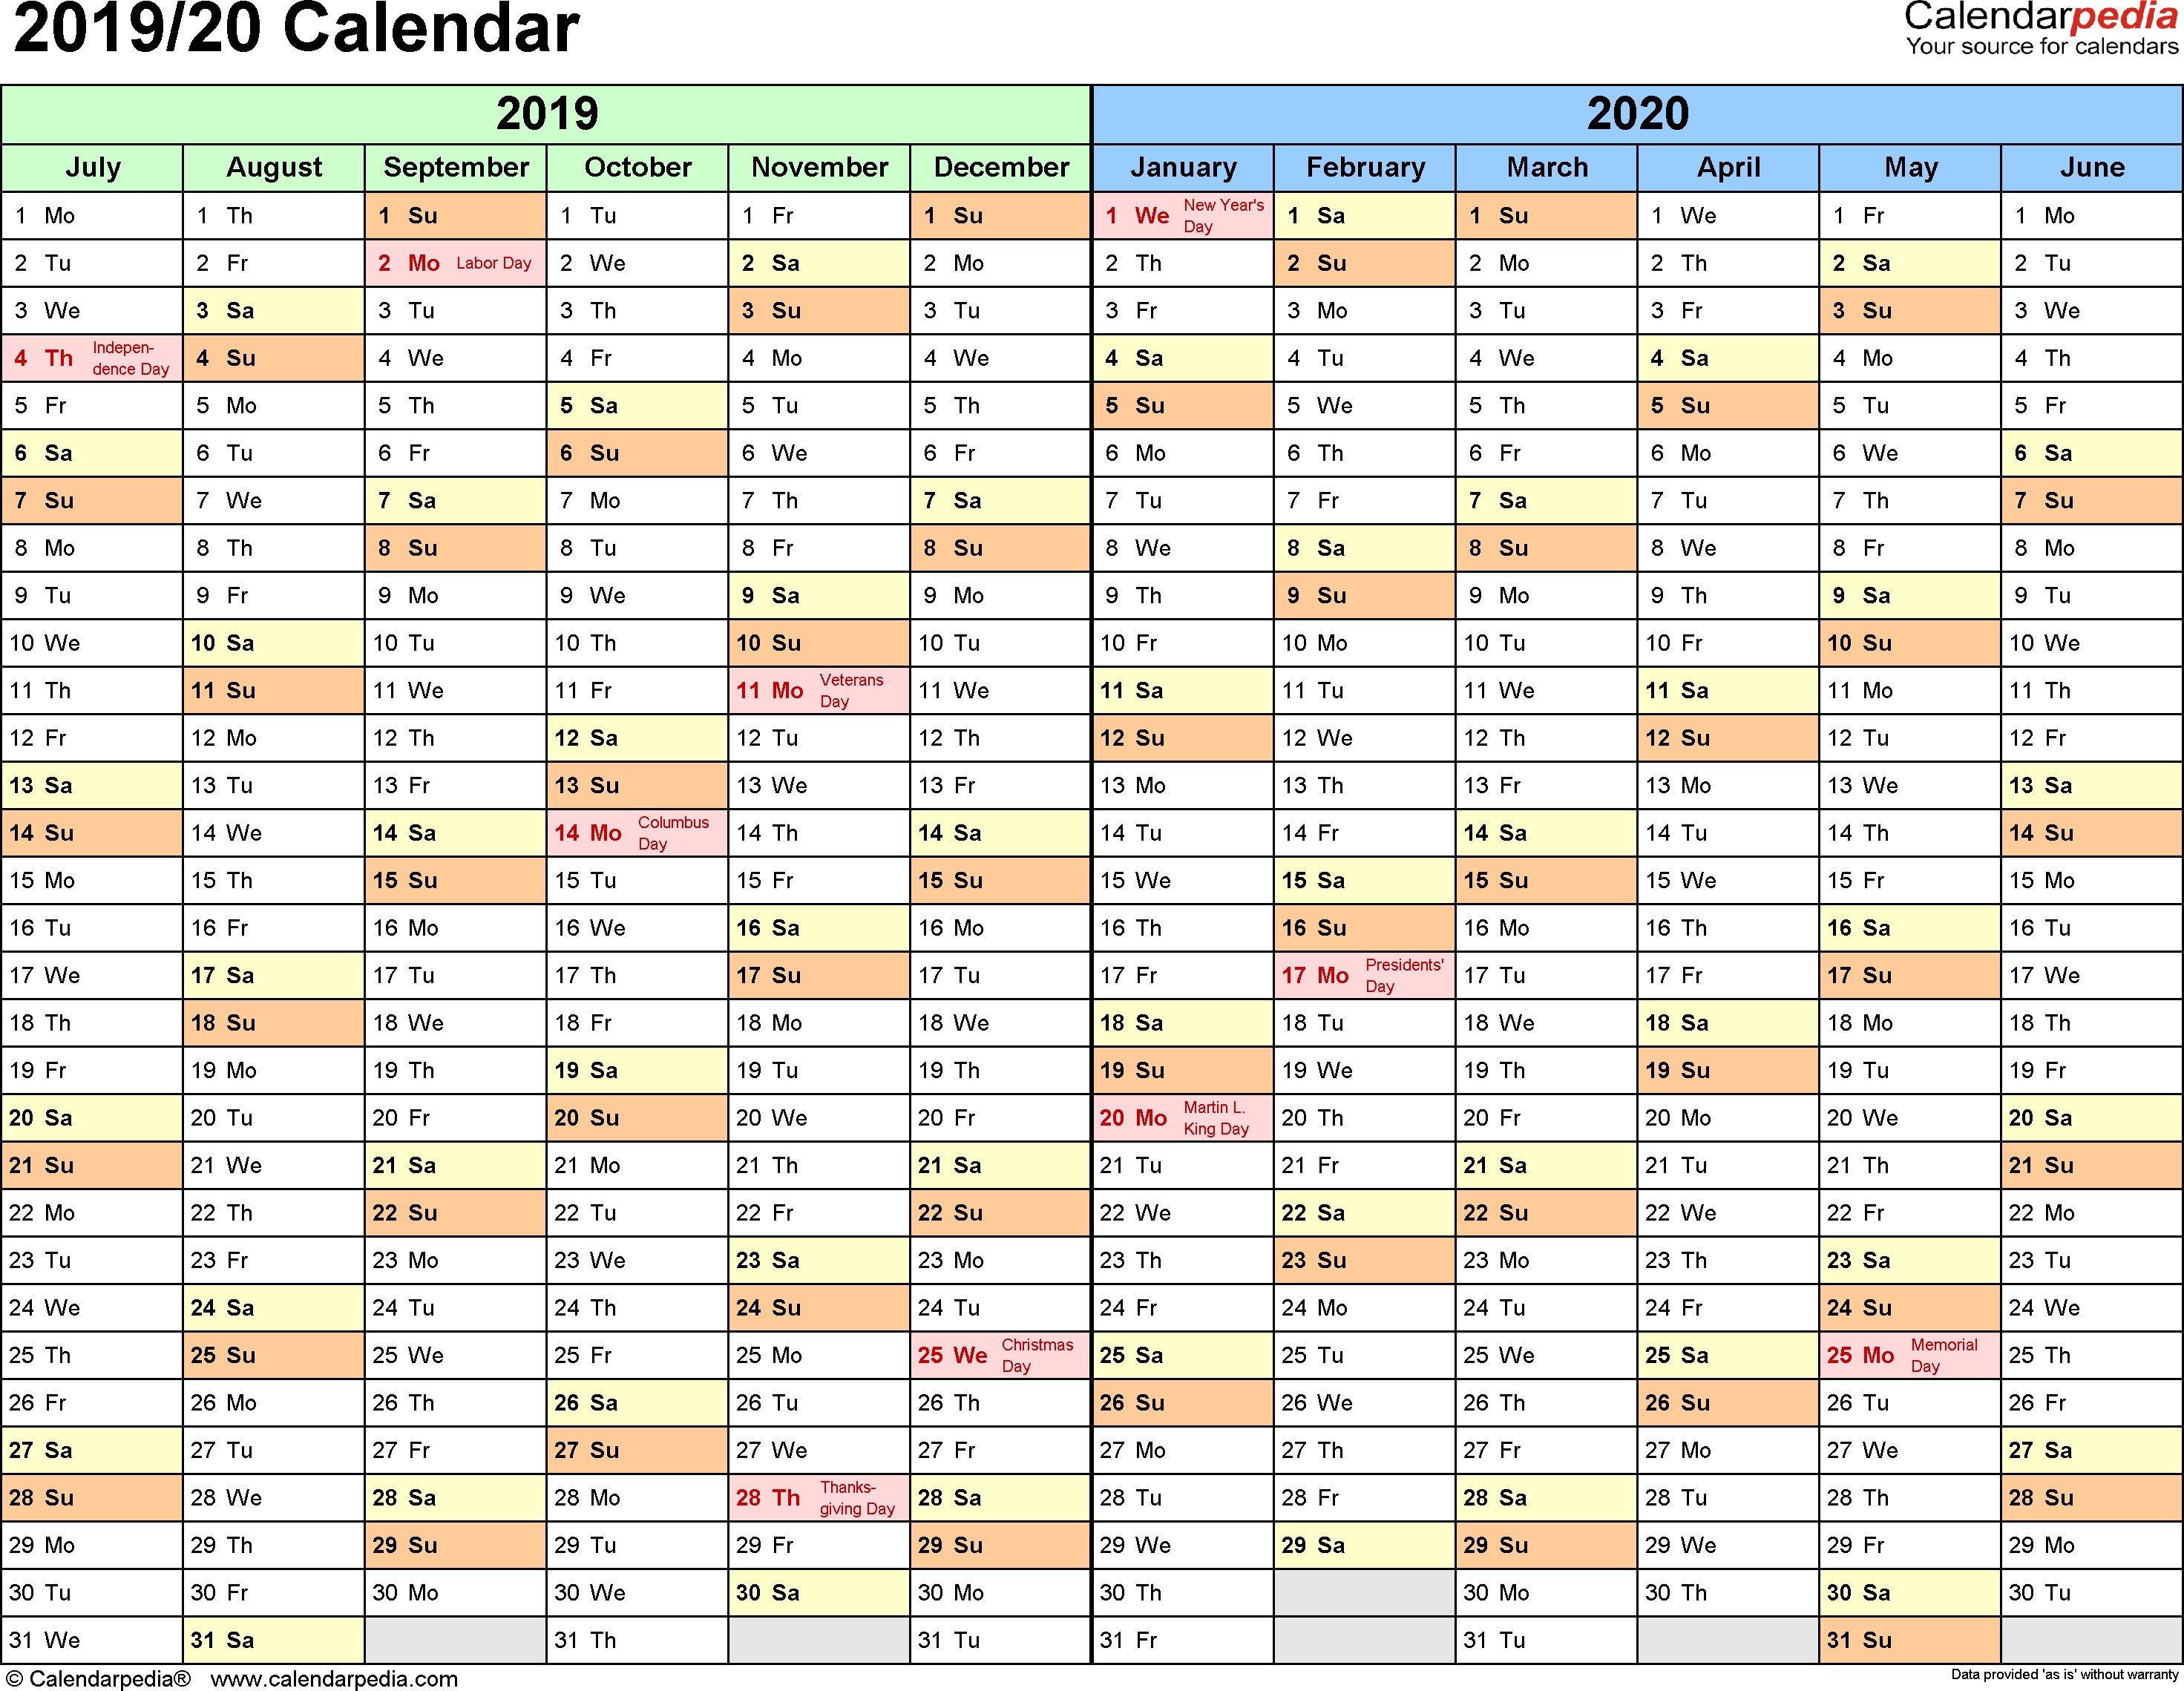 Split Year Calendar 2019/20 (July To June) - Word Templates within One Page Yearly Calendar 2019-2020